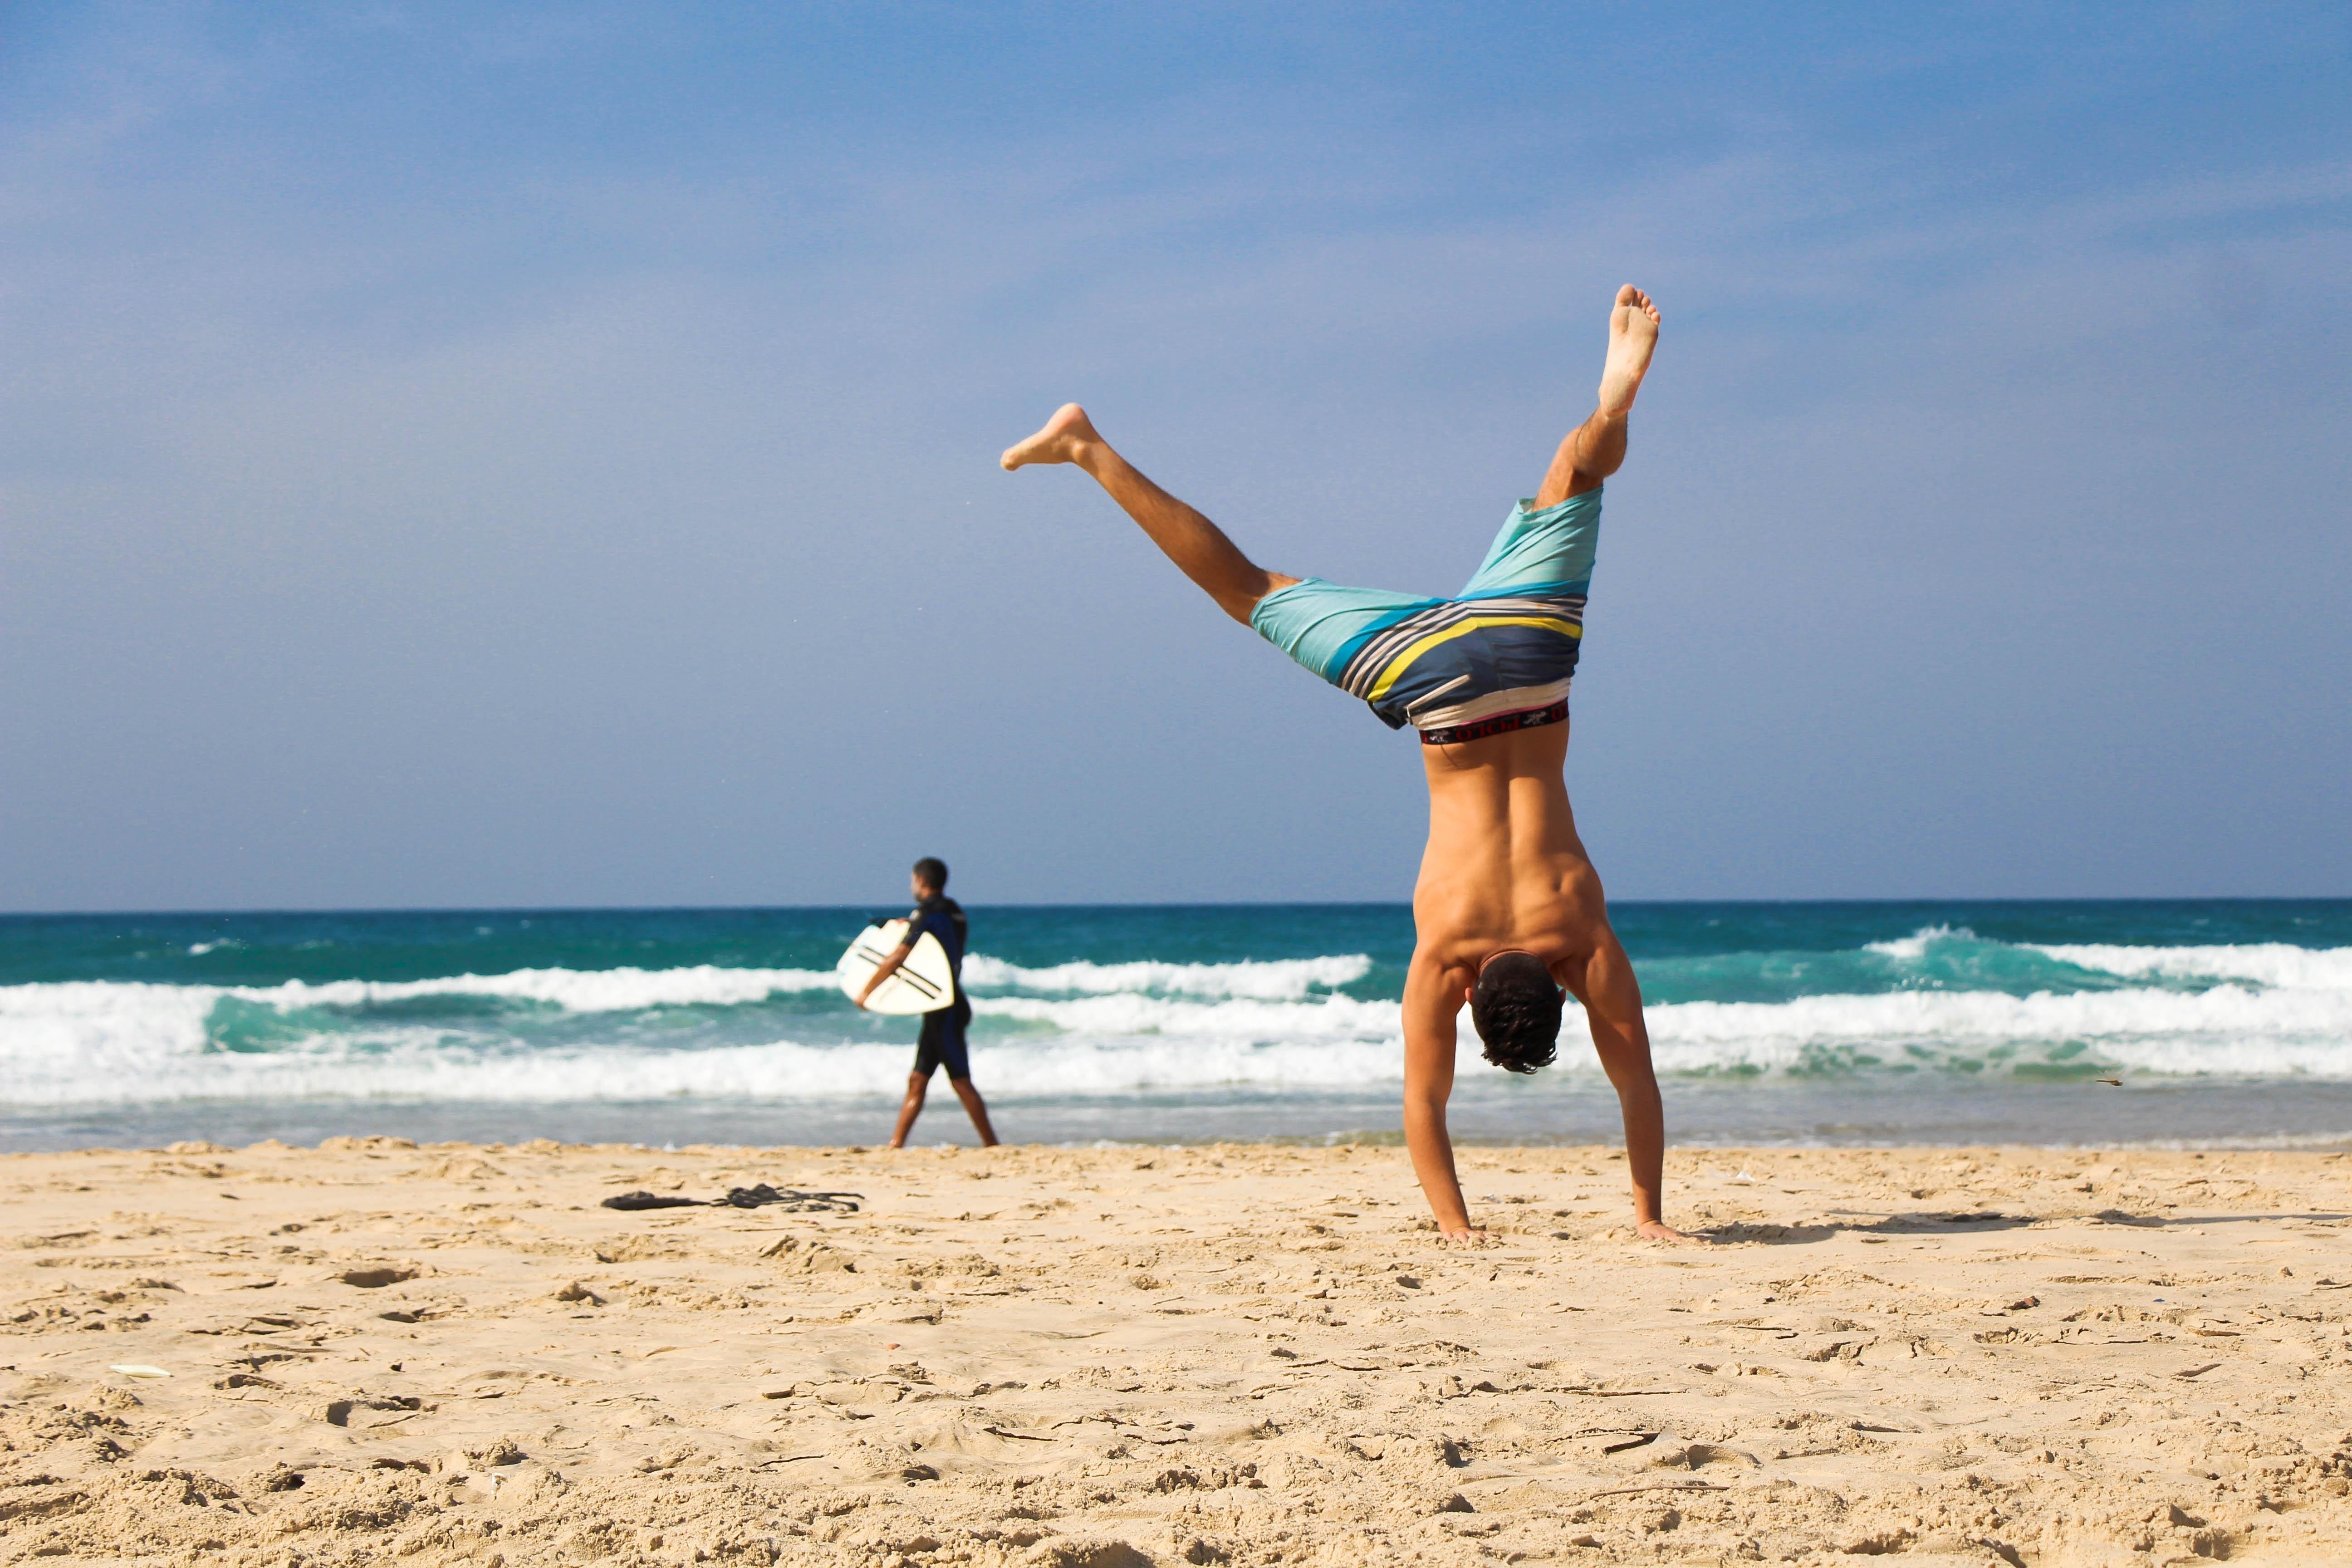 Photo by Pixabay: https://www.pexels.com/photo/man-doing-hand-stand-414012/